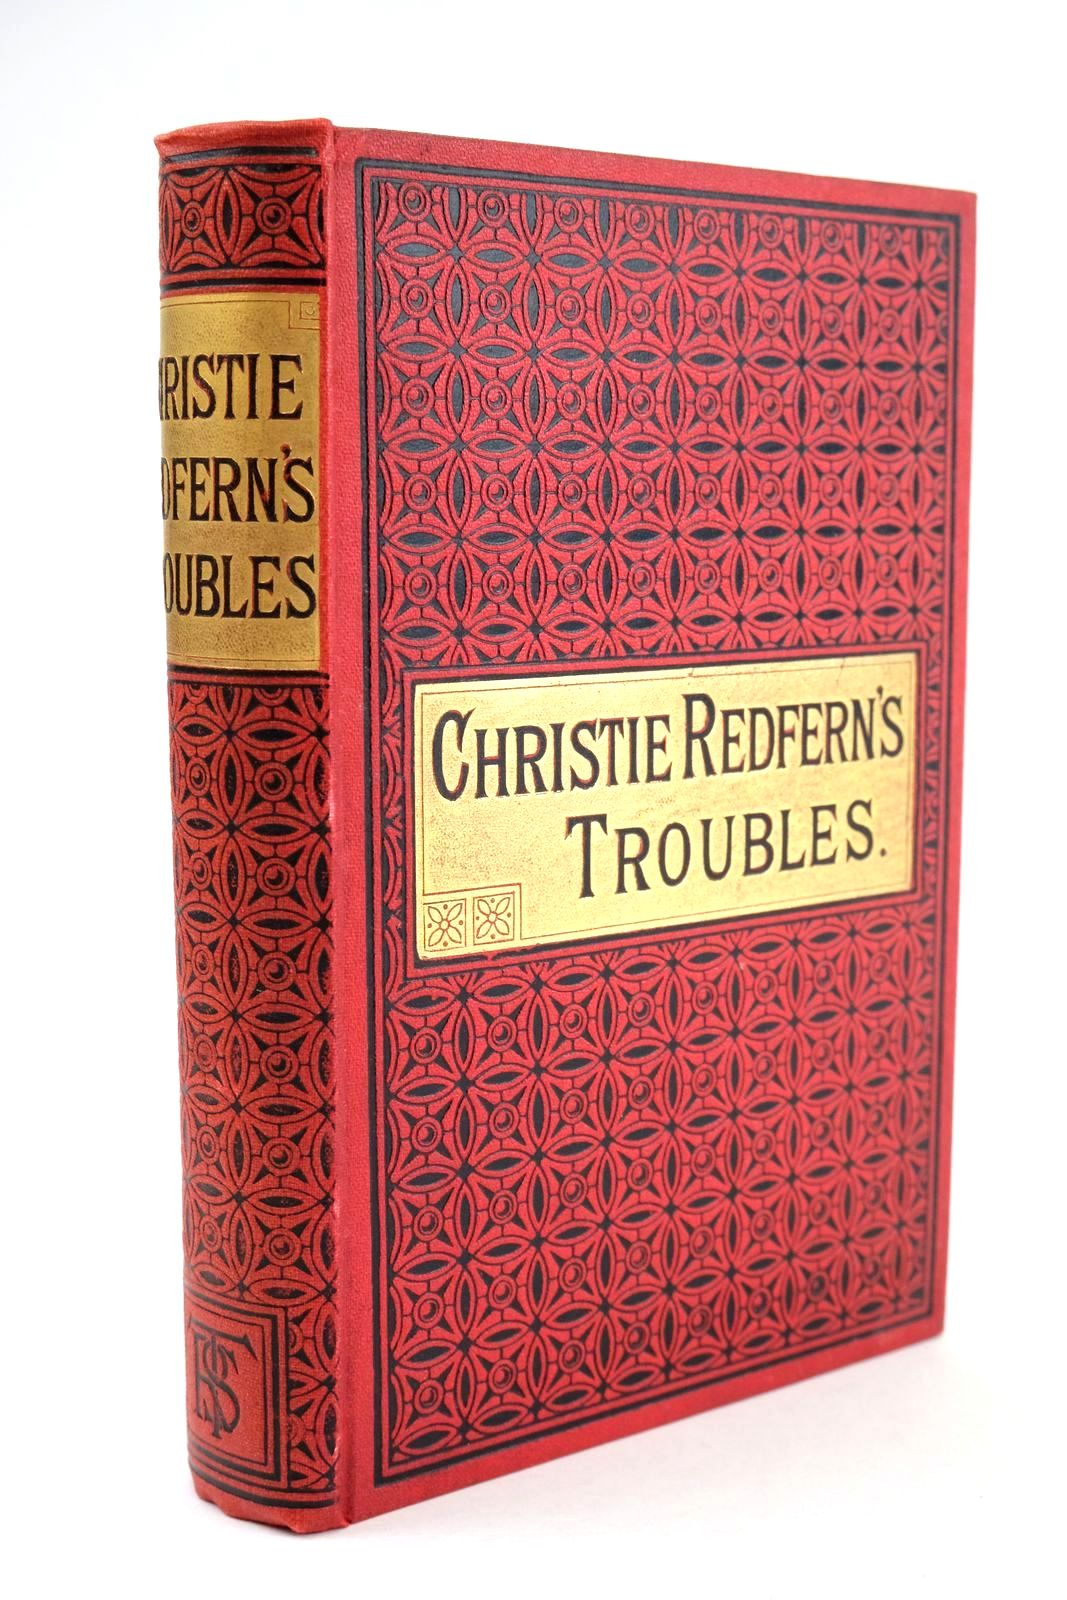 Photo of CHRISTIE REDFERN'S TROUBLES written by Robertson, Mrs published by The Religious Tract Society (STOCK CODE: 1325211)  for sale by Stella & Rose's Books